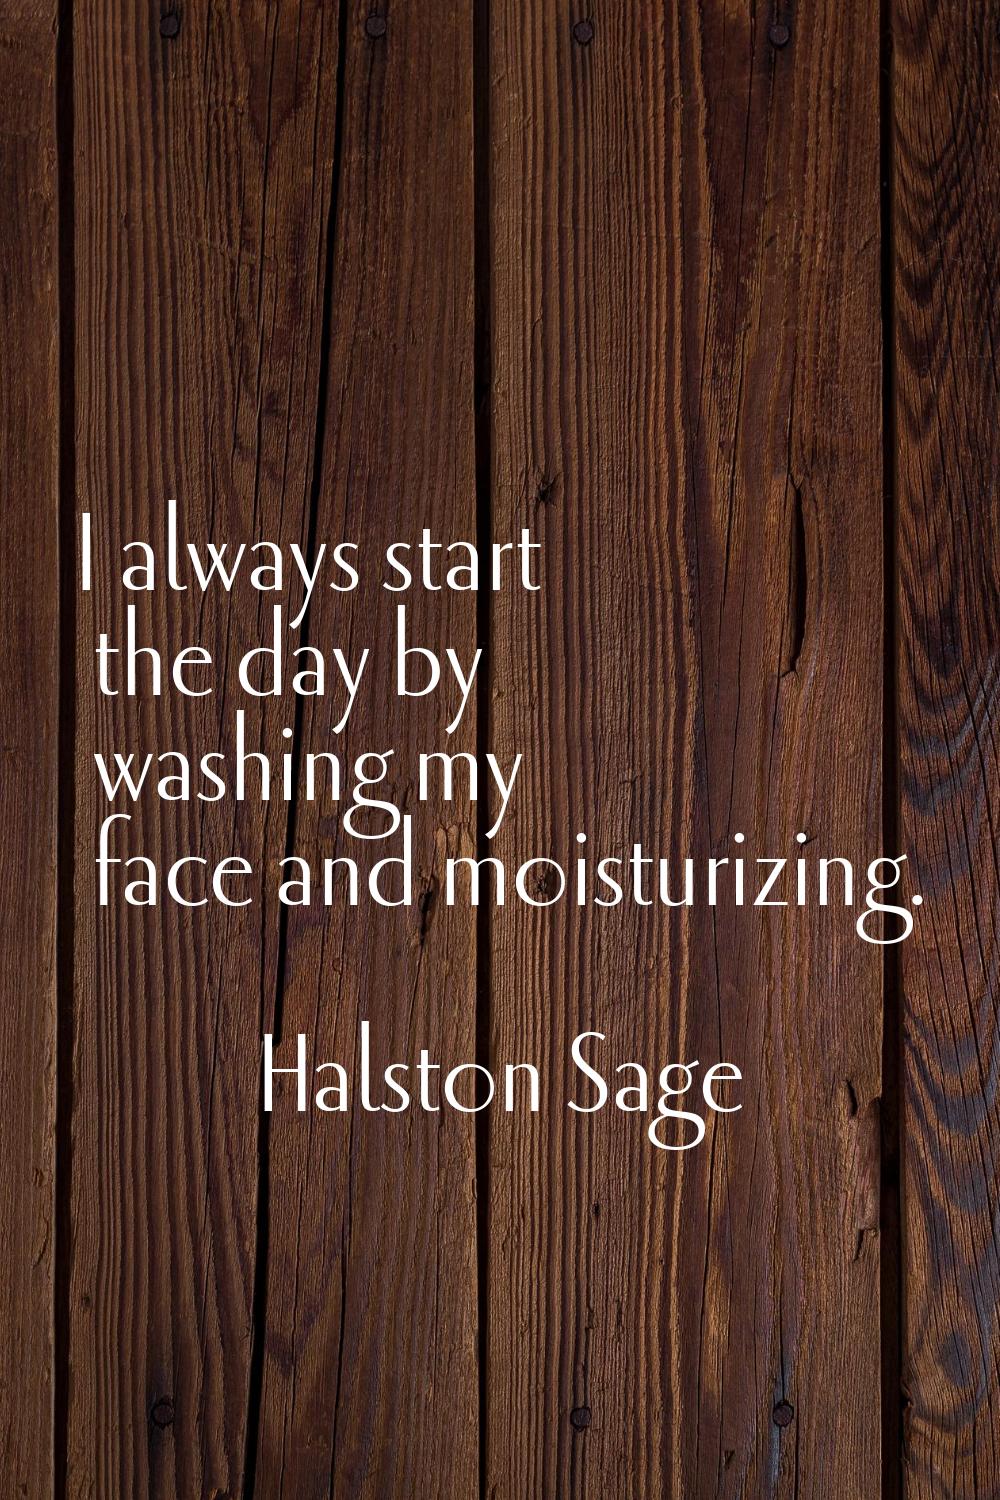 I always start the day by washing my face and moisturizing.